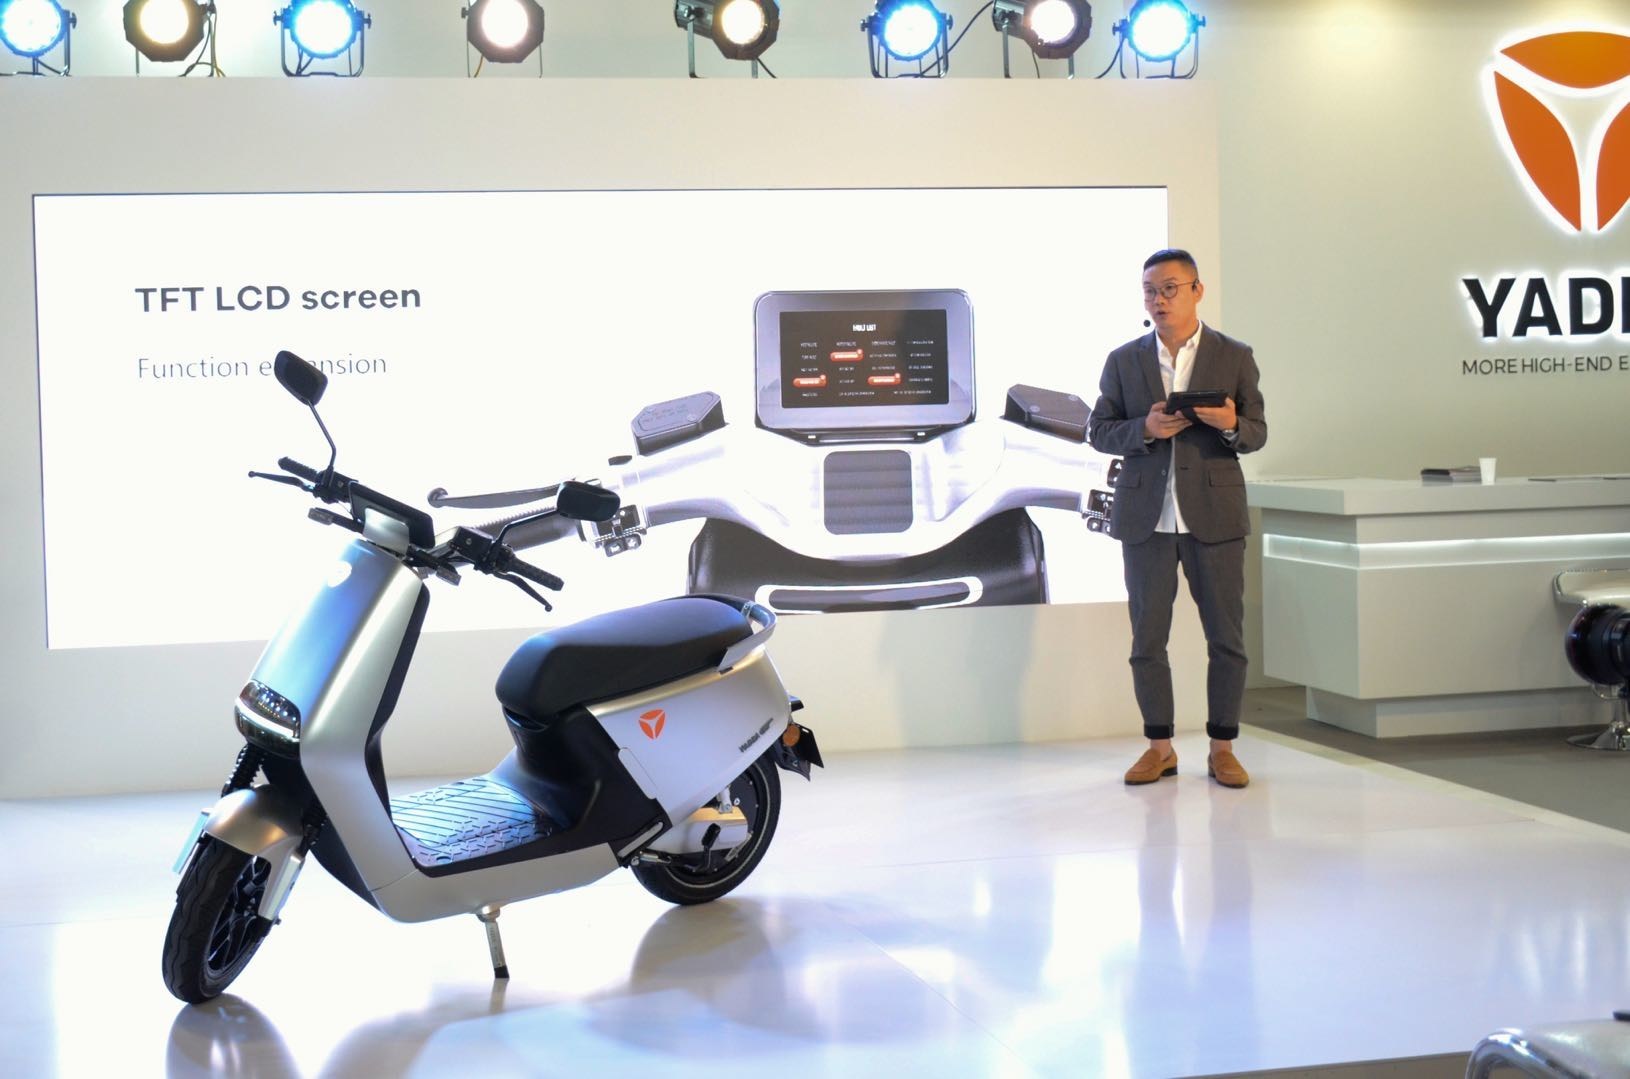 With exports to 77 countries, world-leading e-scooter manufacturer Yadea draws crowds at EICMA 2018 with the new G5